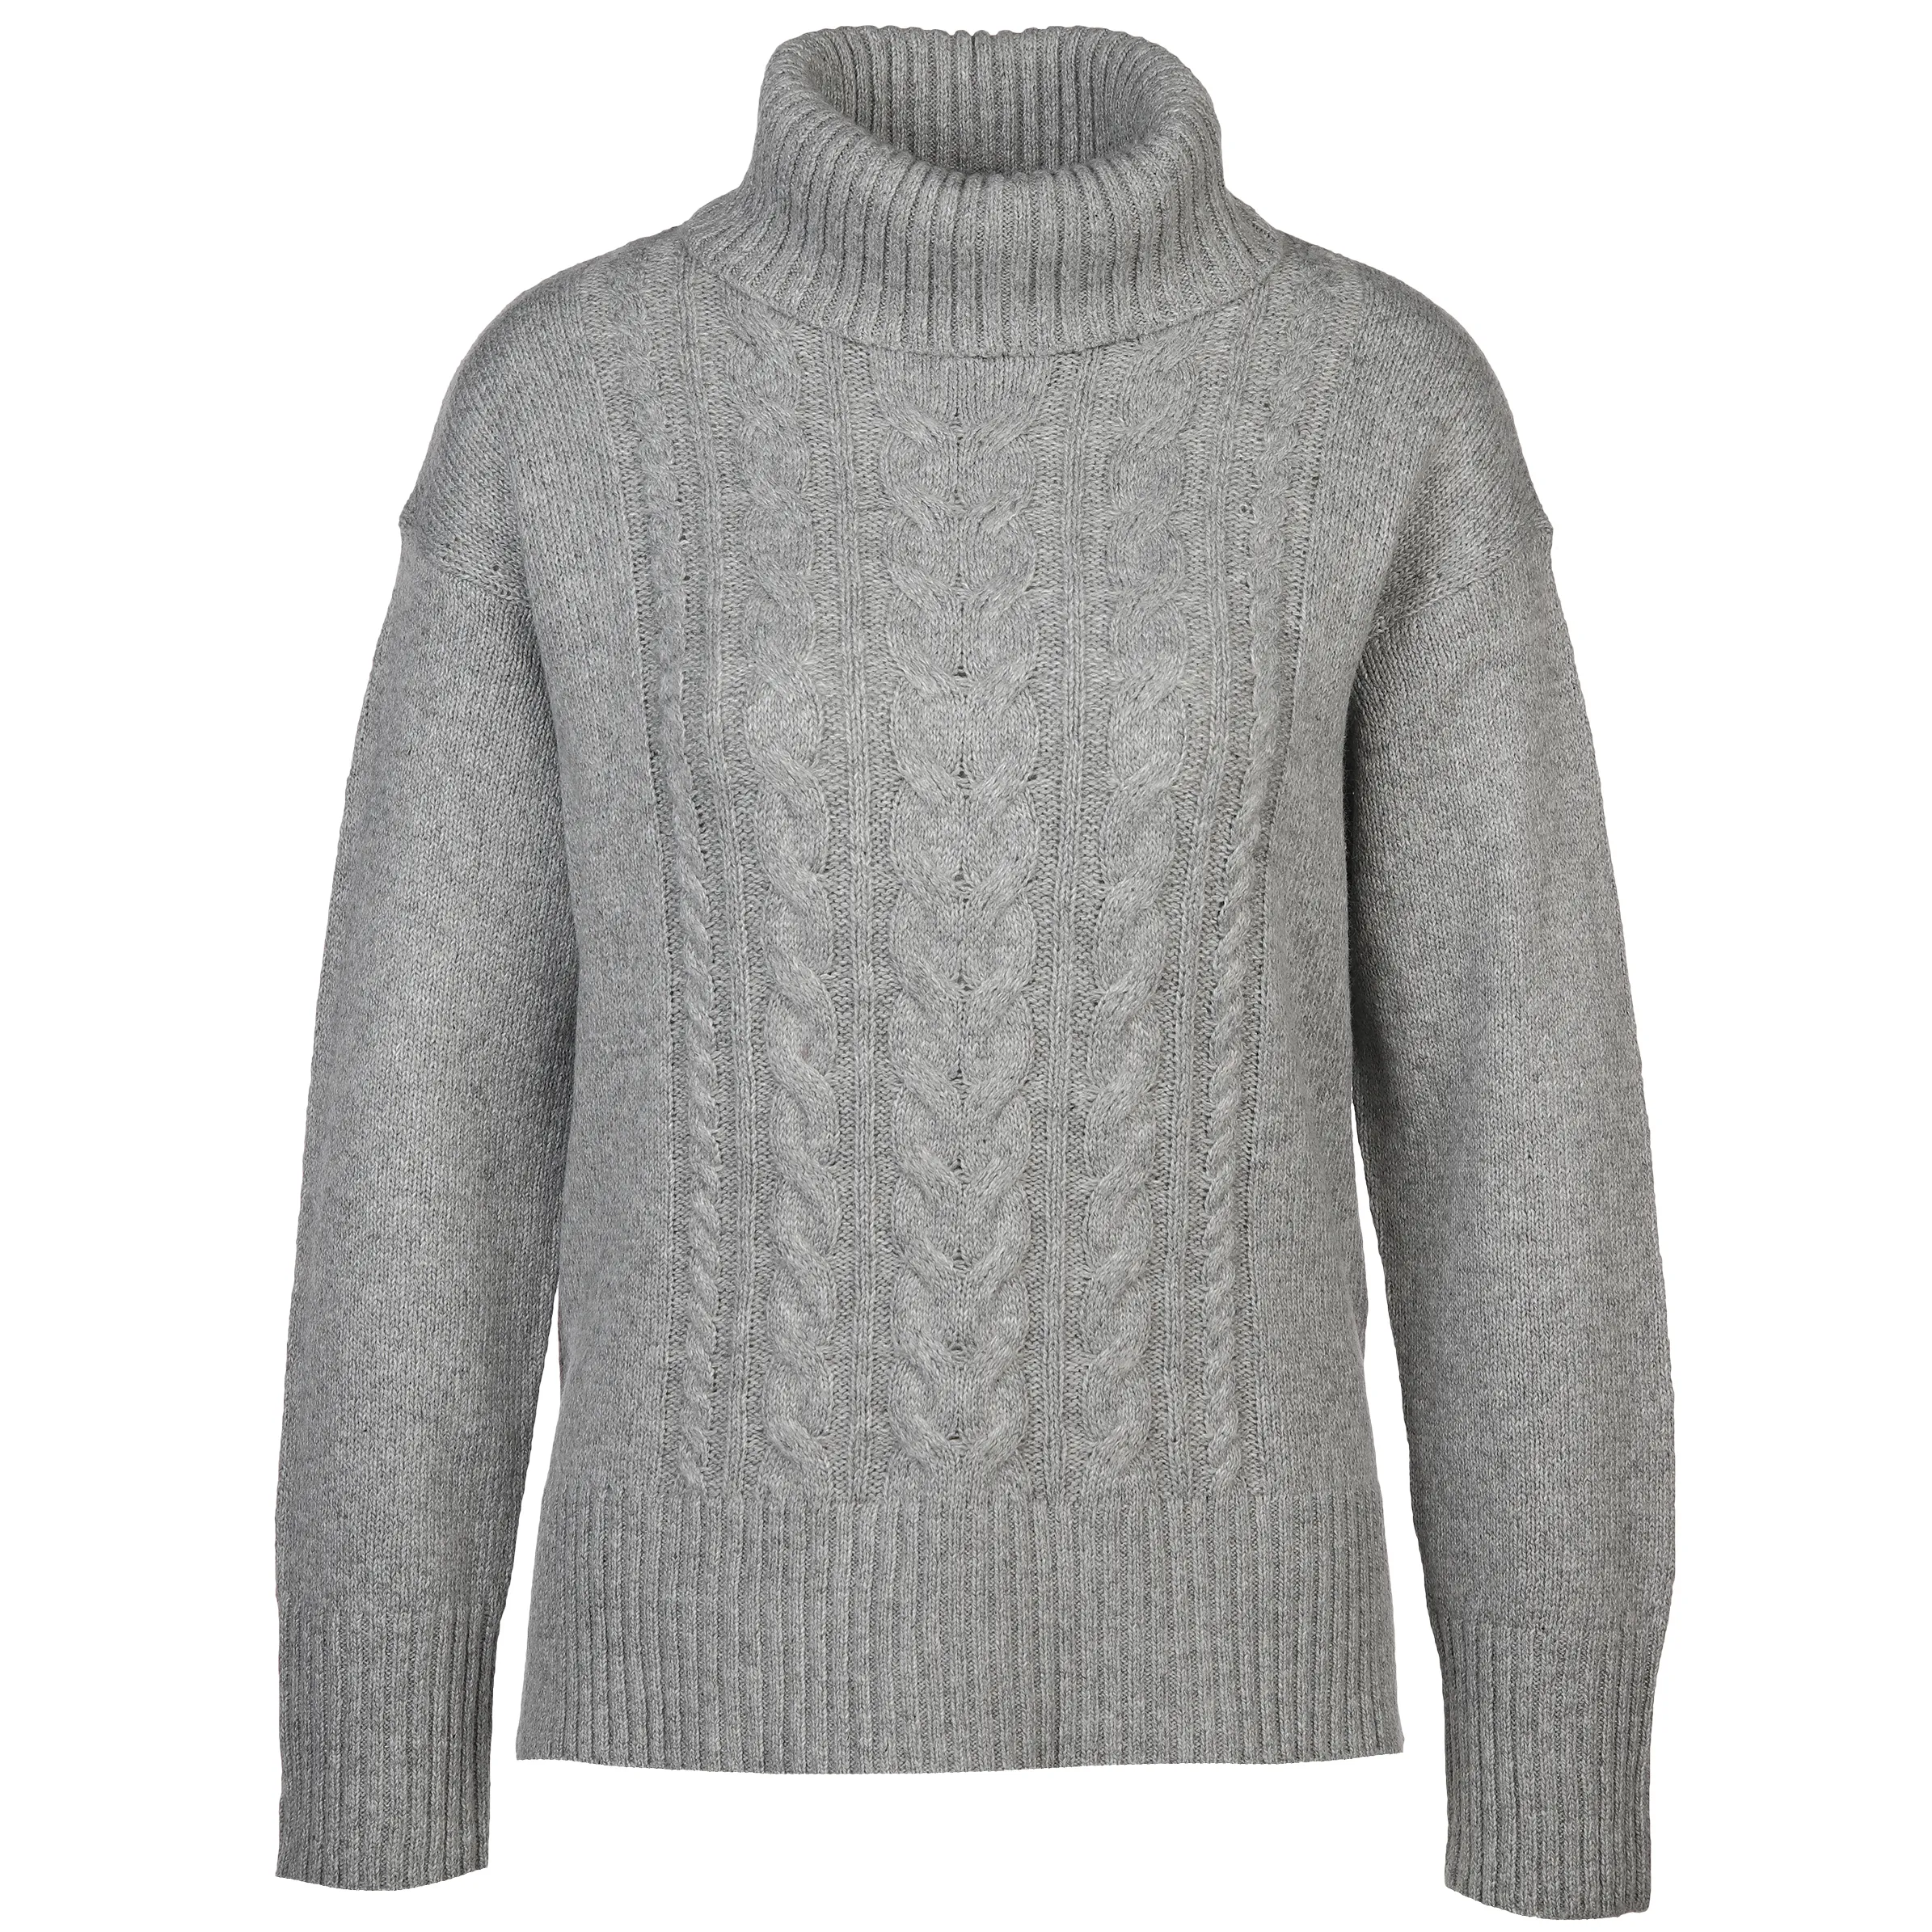 Tom Tailor 1041157 Knit pullover cable turtleneck Grau 887440 21373 1